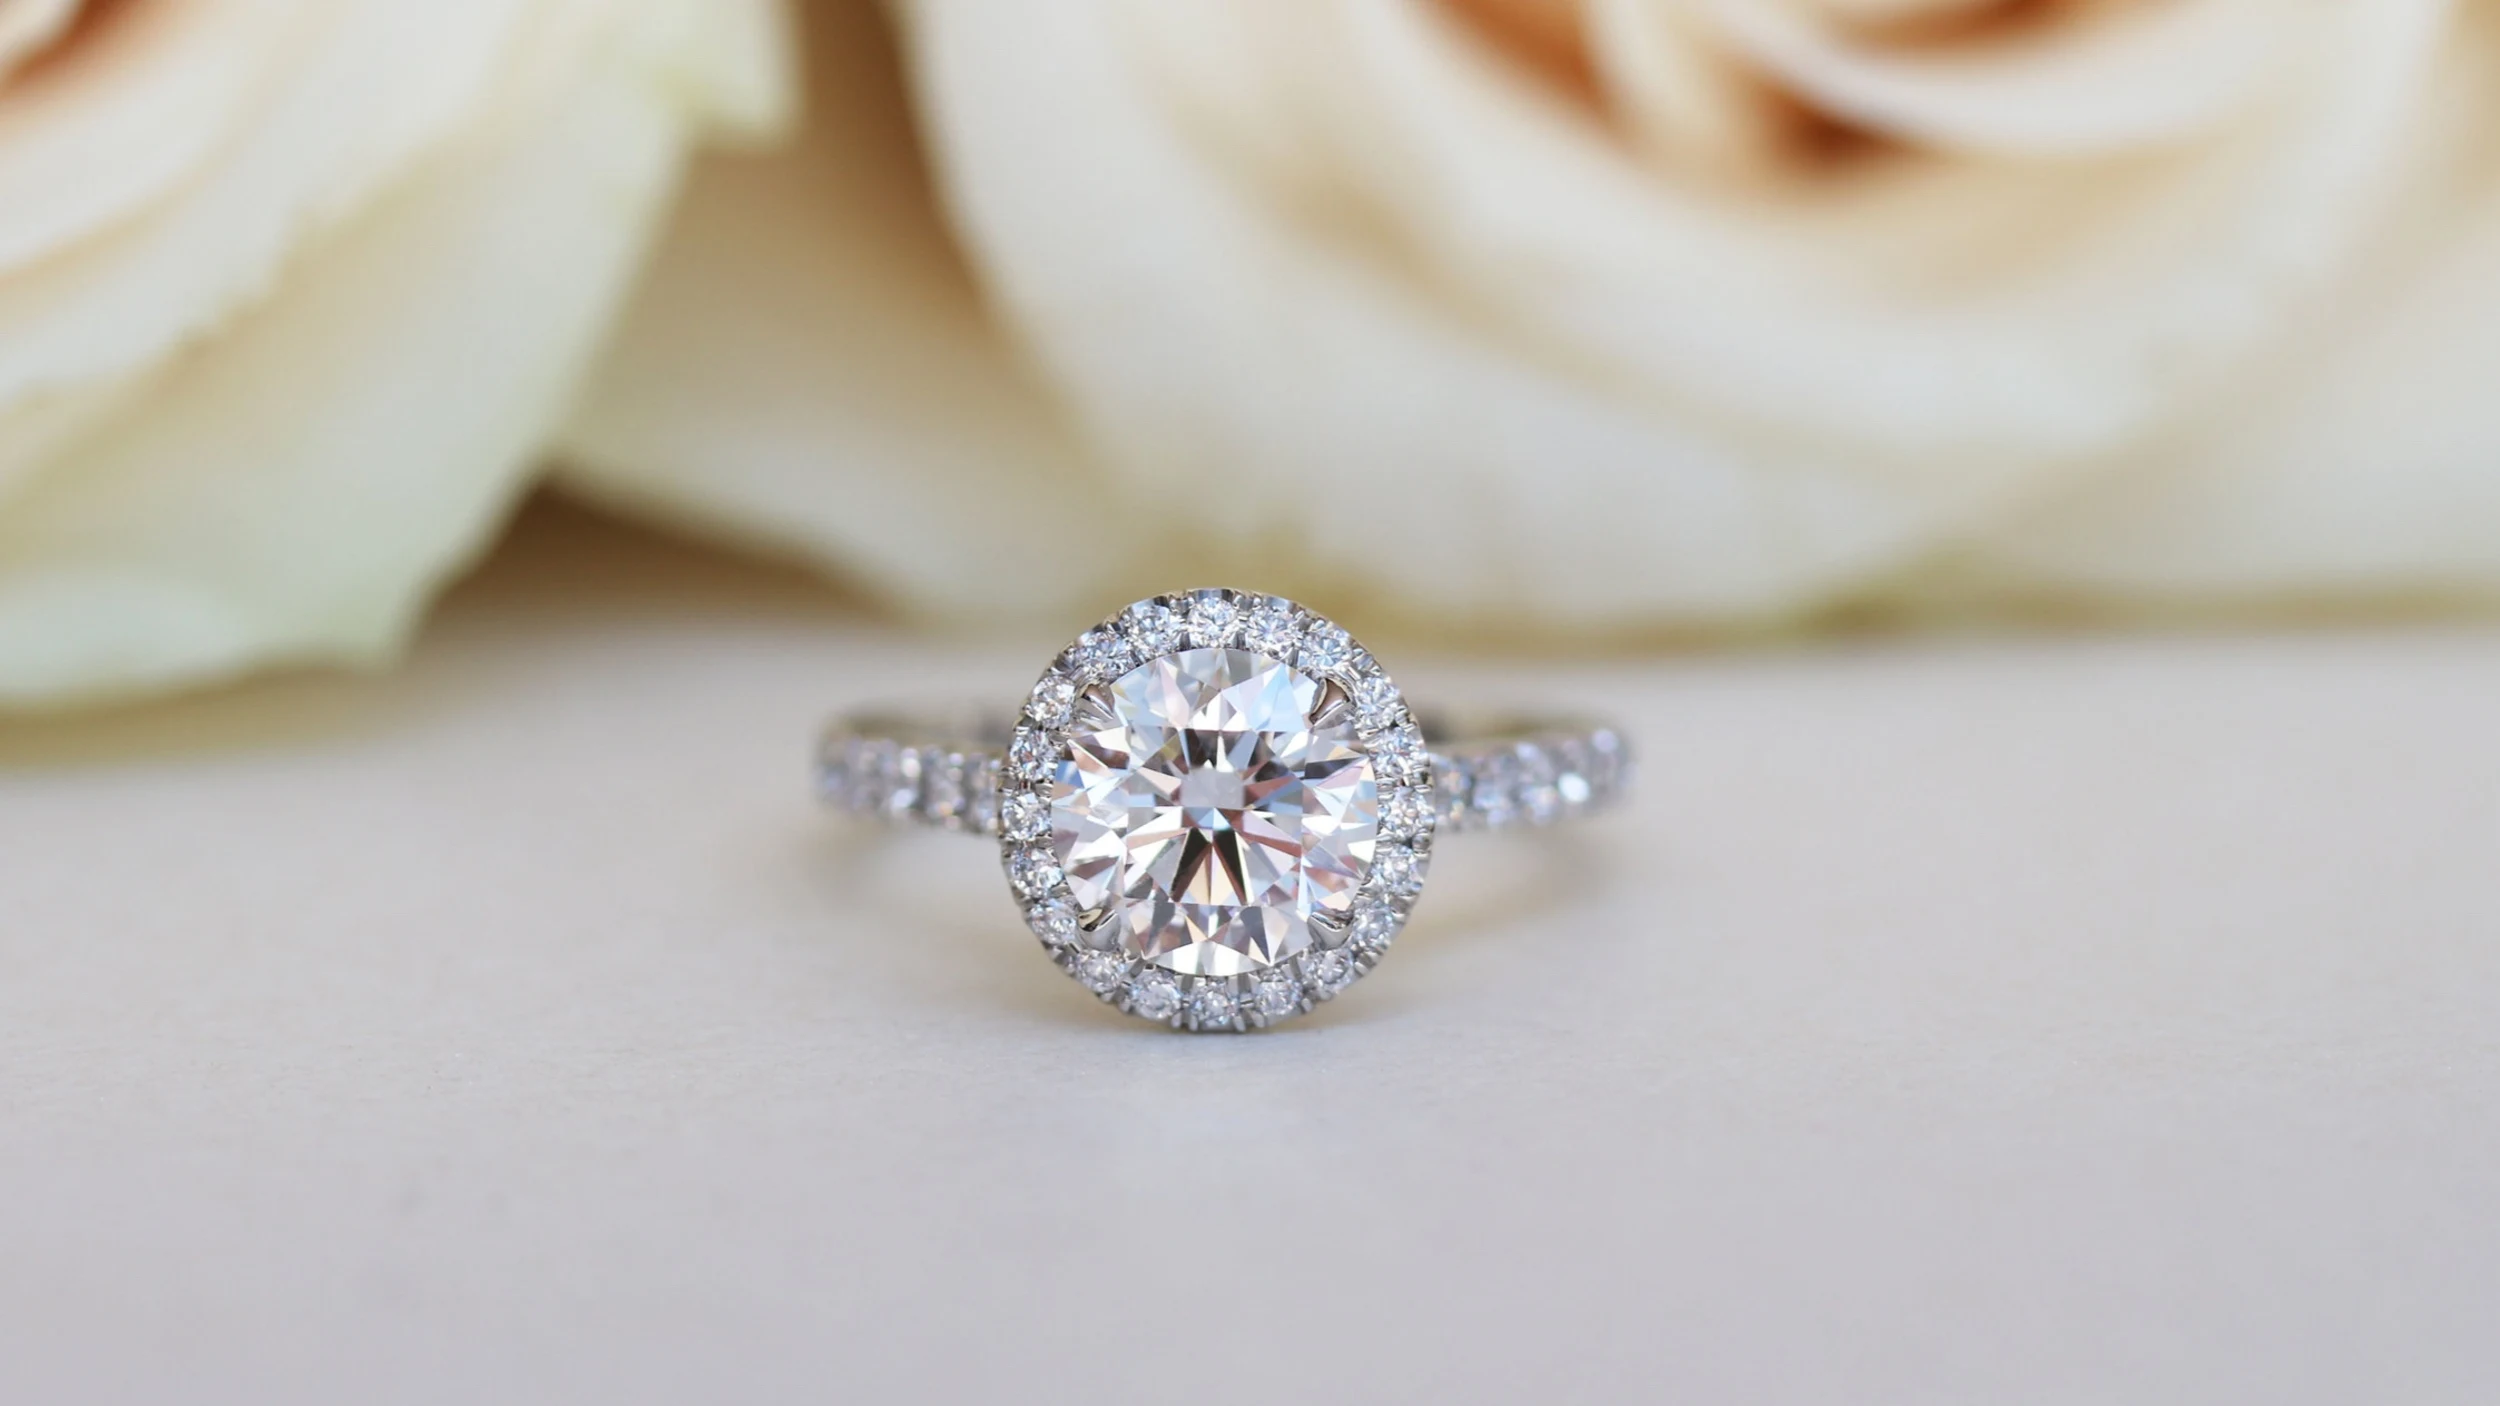 How to Clean Diamond Rings & Keep Them Shining Forever